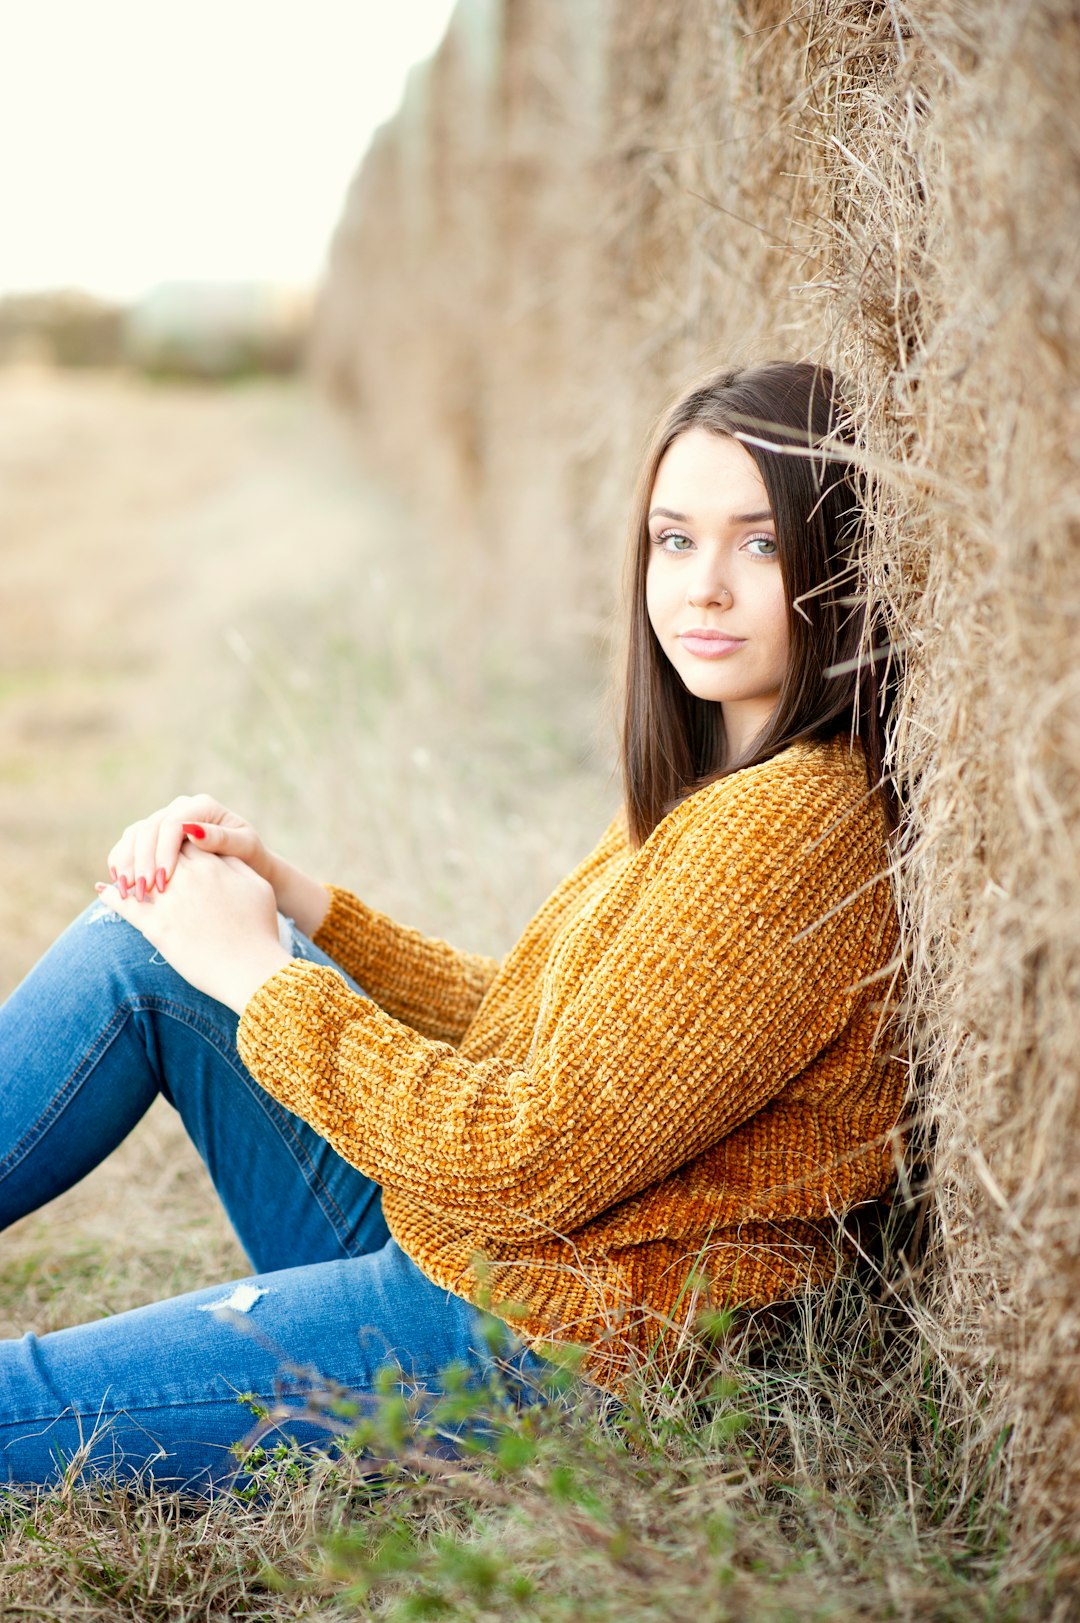 woman in yellow knit sweater and blue denim jeans sitting on brown grass field during daytime